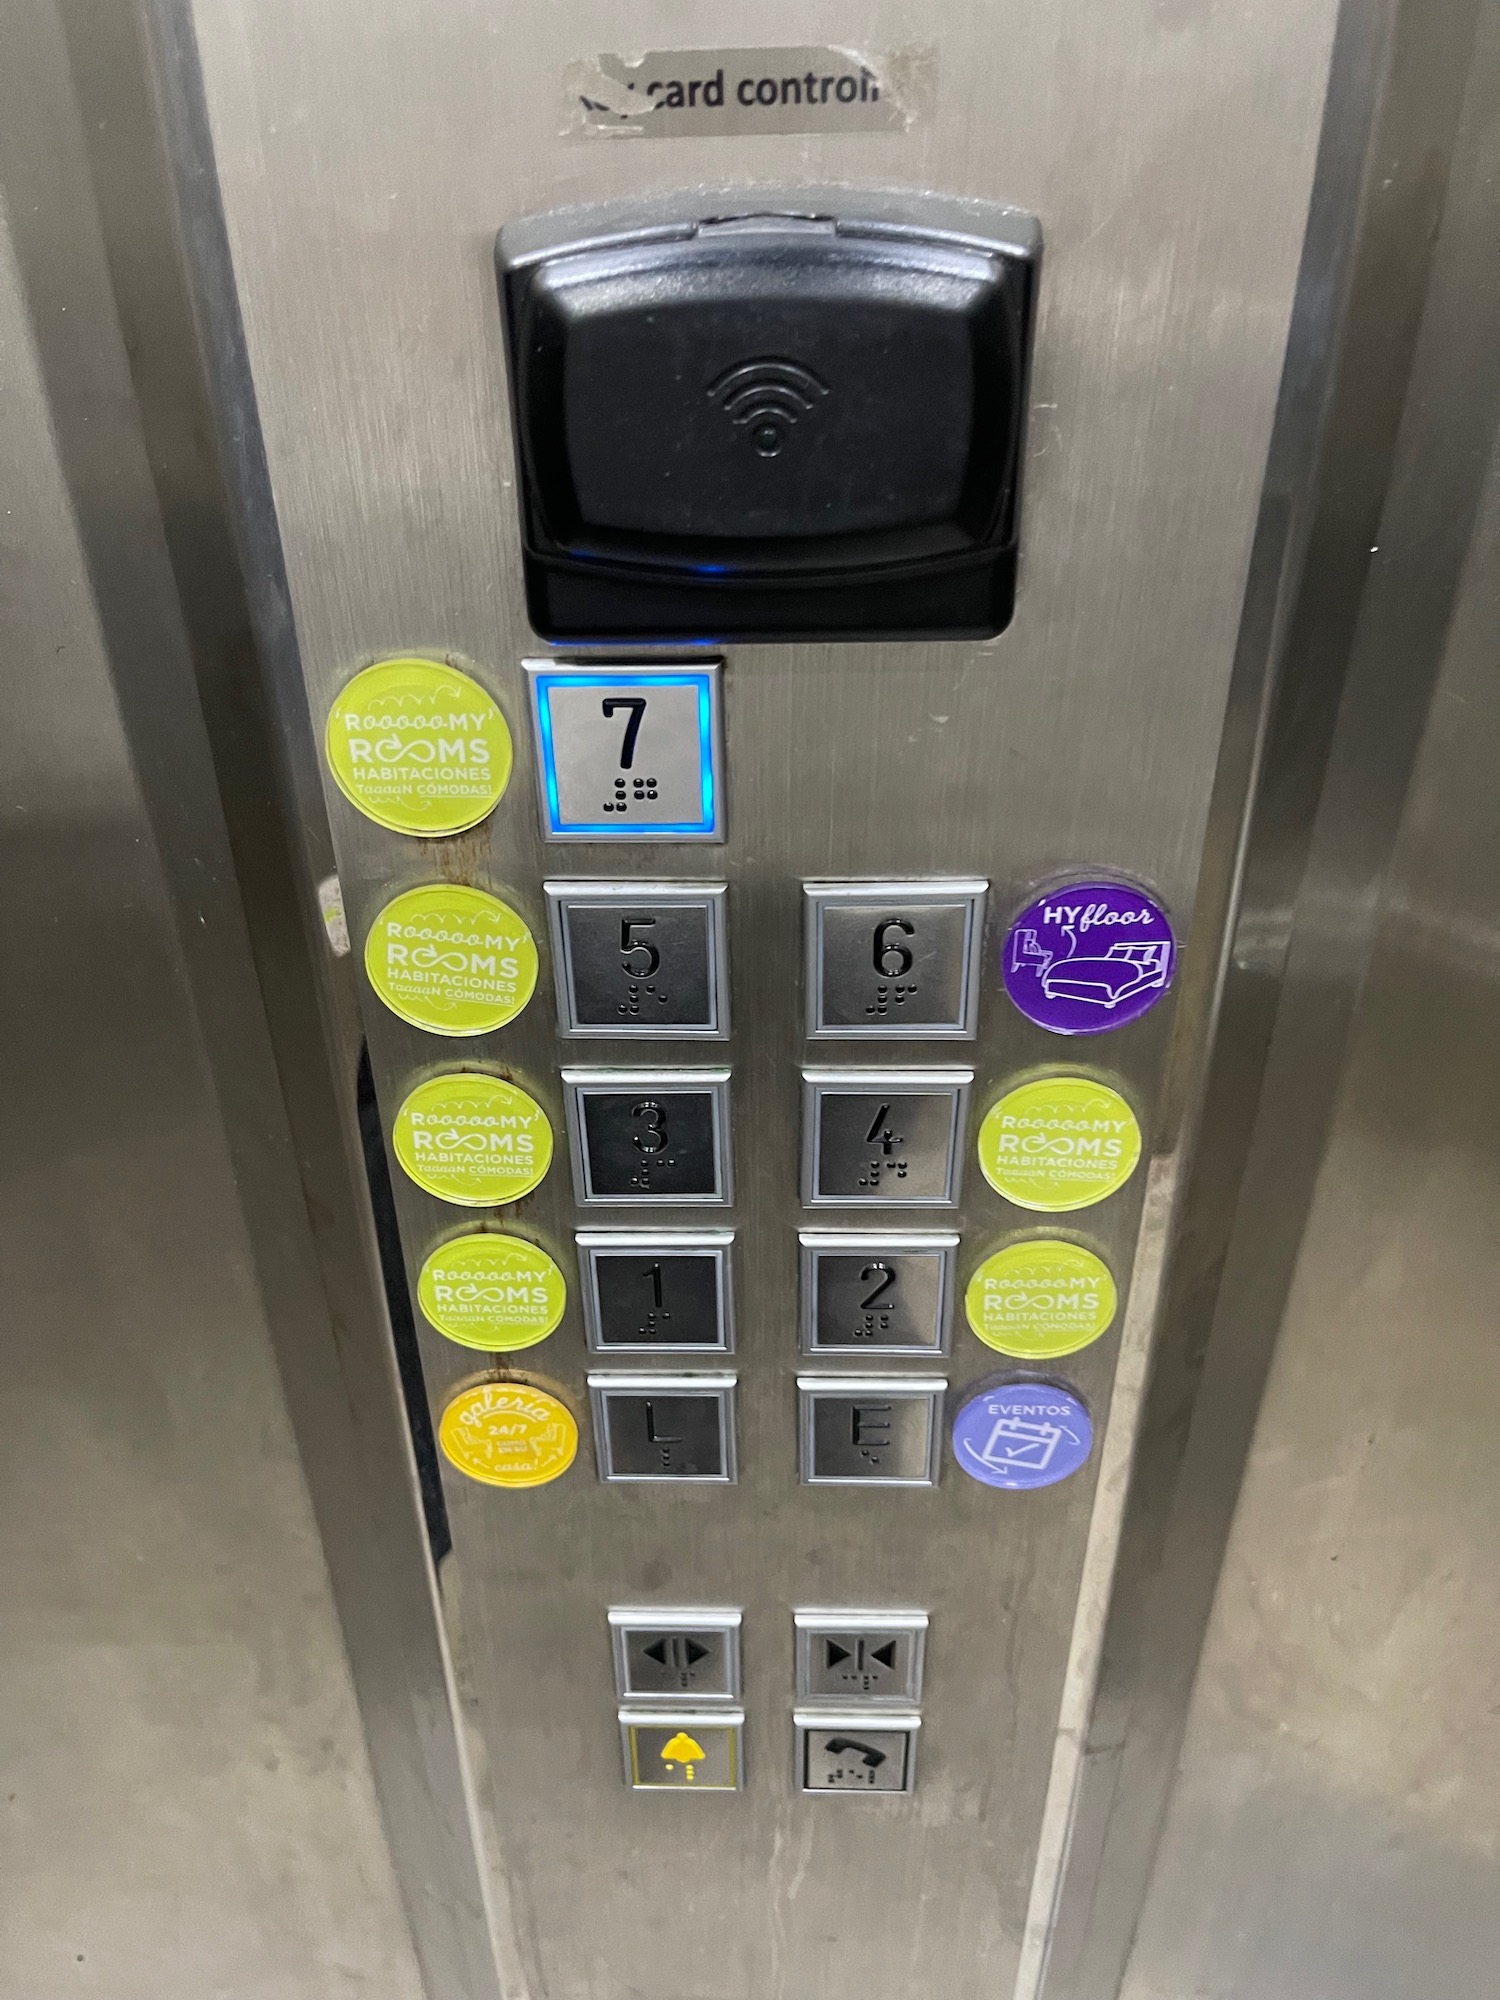 buttons on a elevator